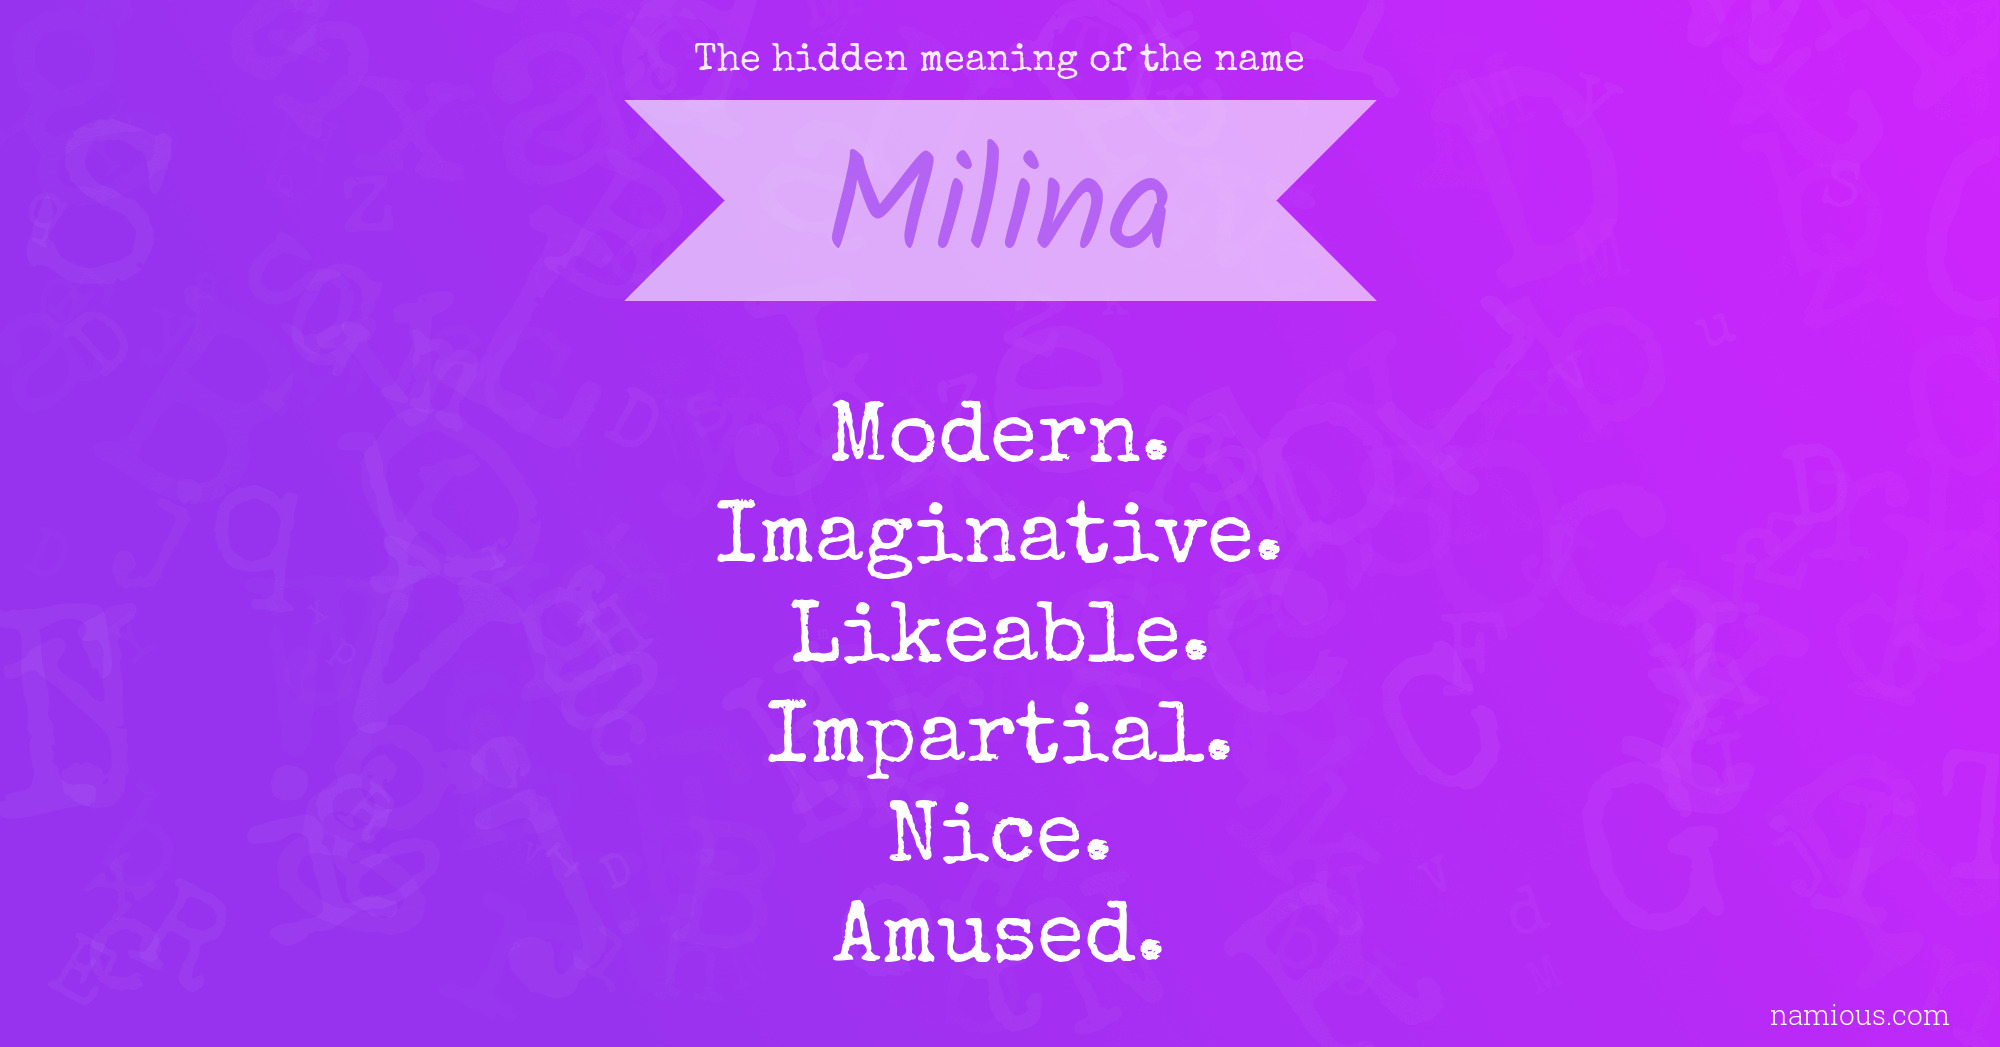 The hidden meaning of the name Milina